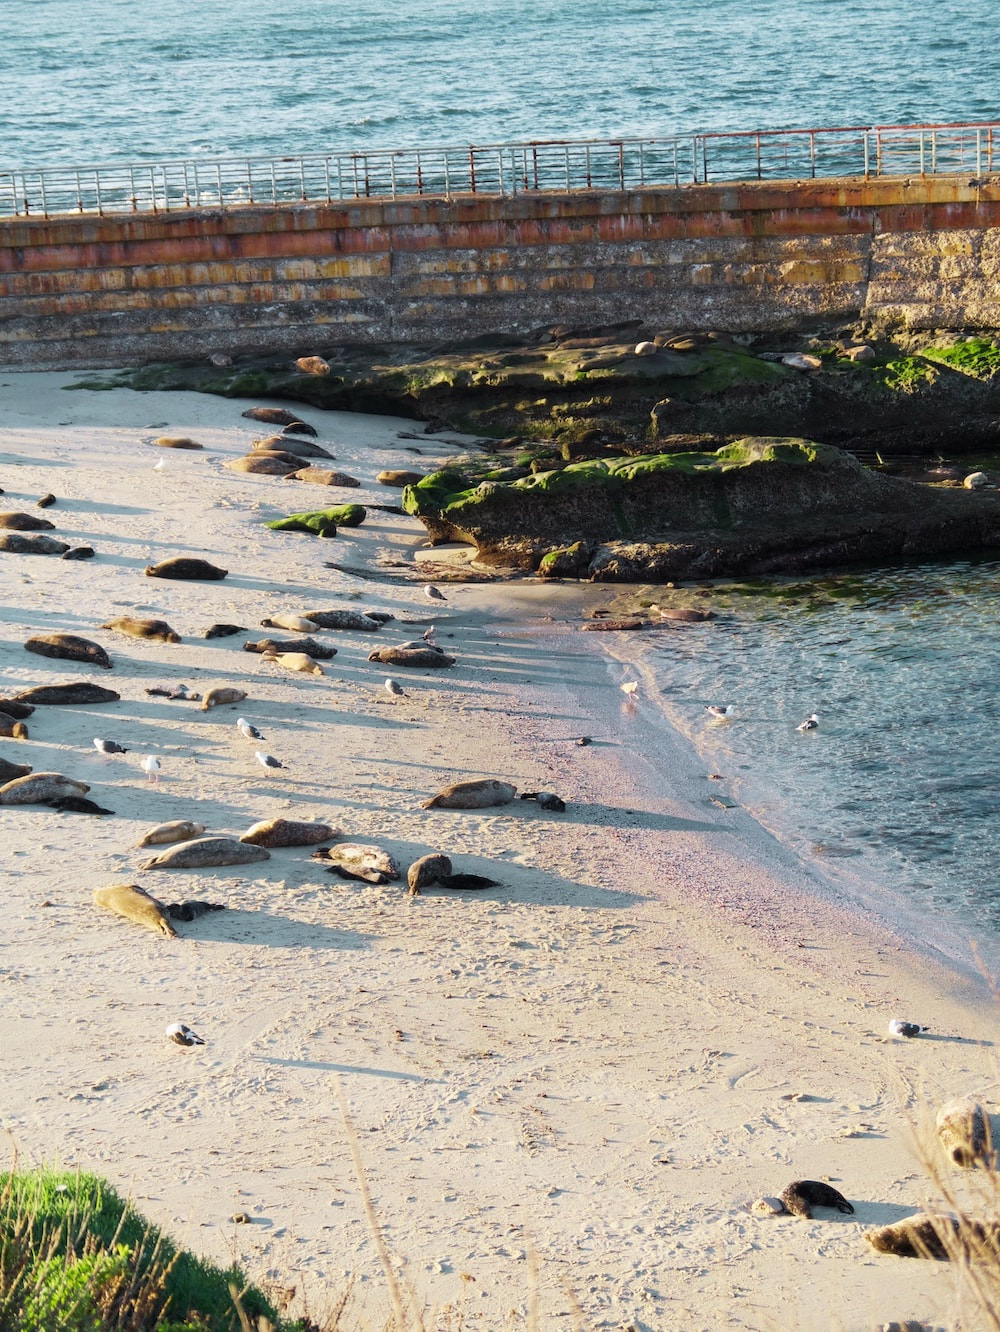 Group of Seals on Beach in La Jolla Cove